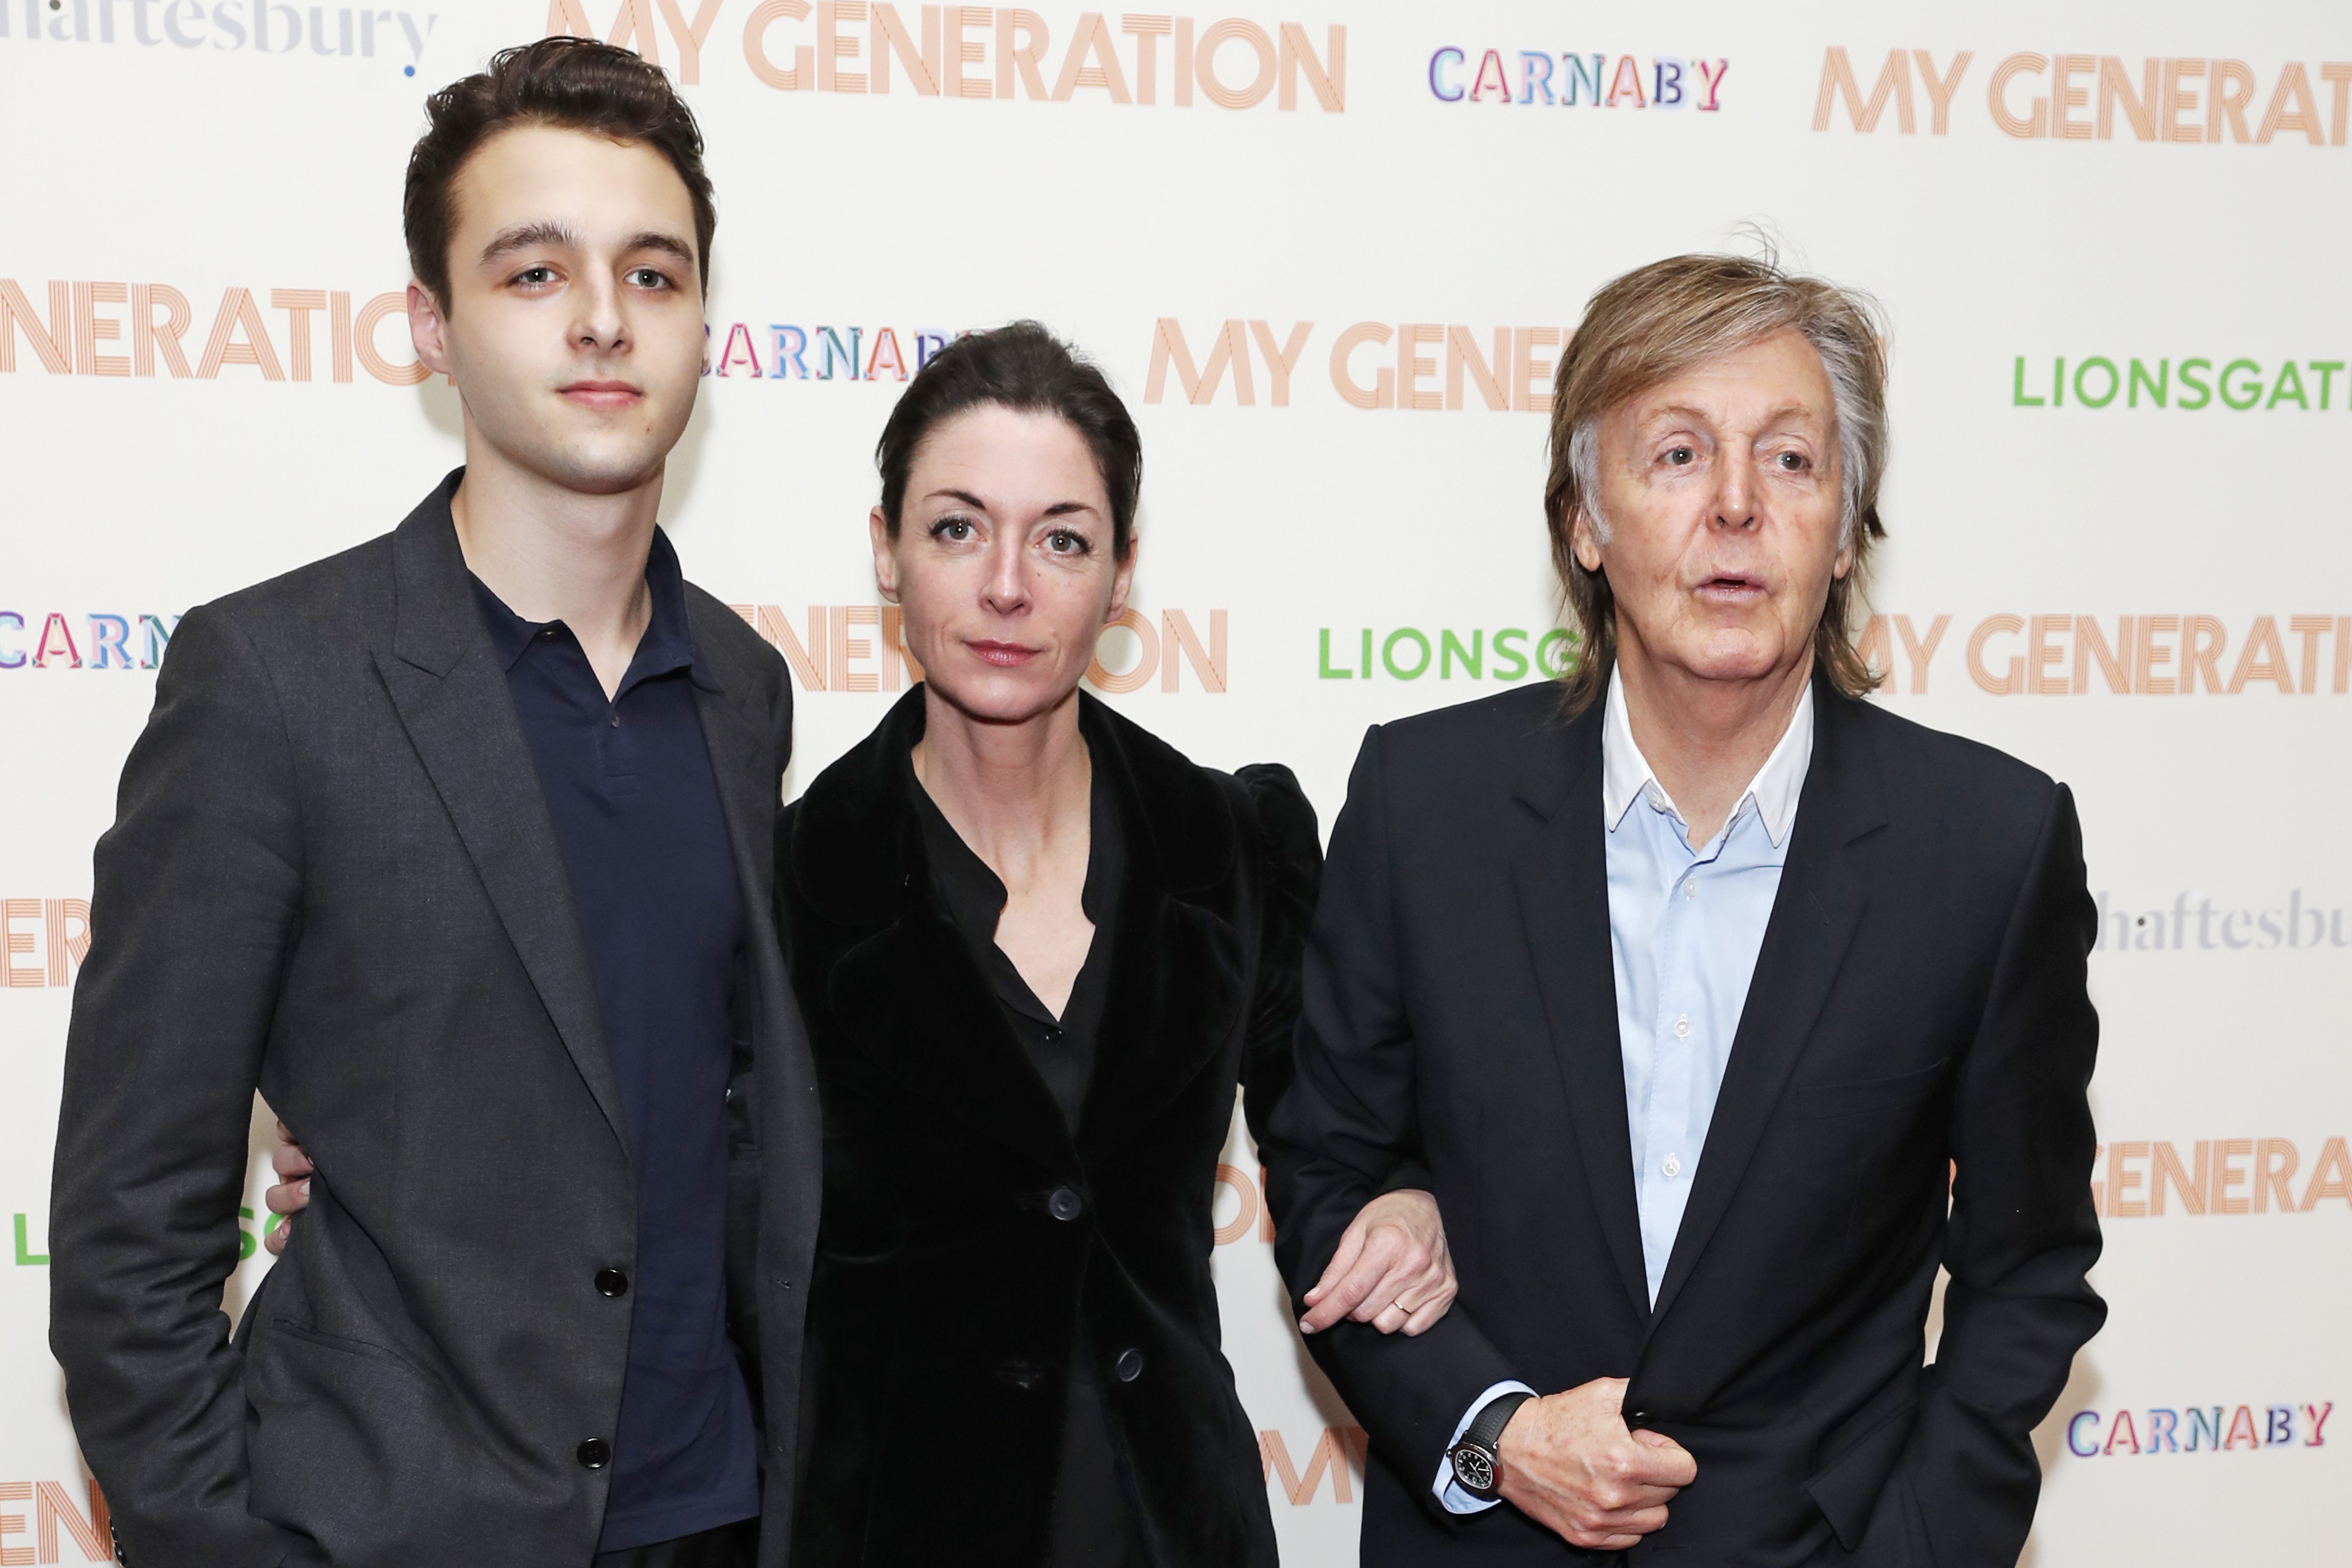 Arthur Donald, Mary McCartney, and Paul McCartney at a special screening of "My Generation" on March 14, 2018, in London, England | Source: Getty Images